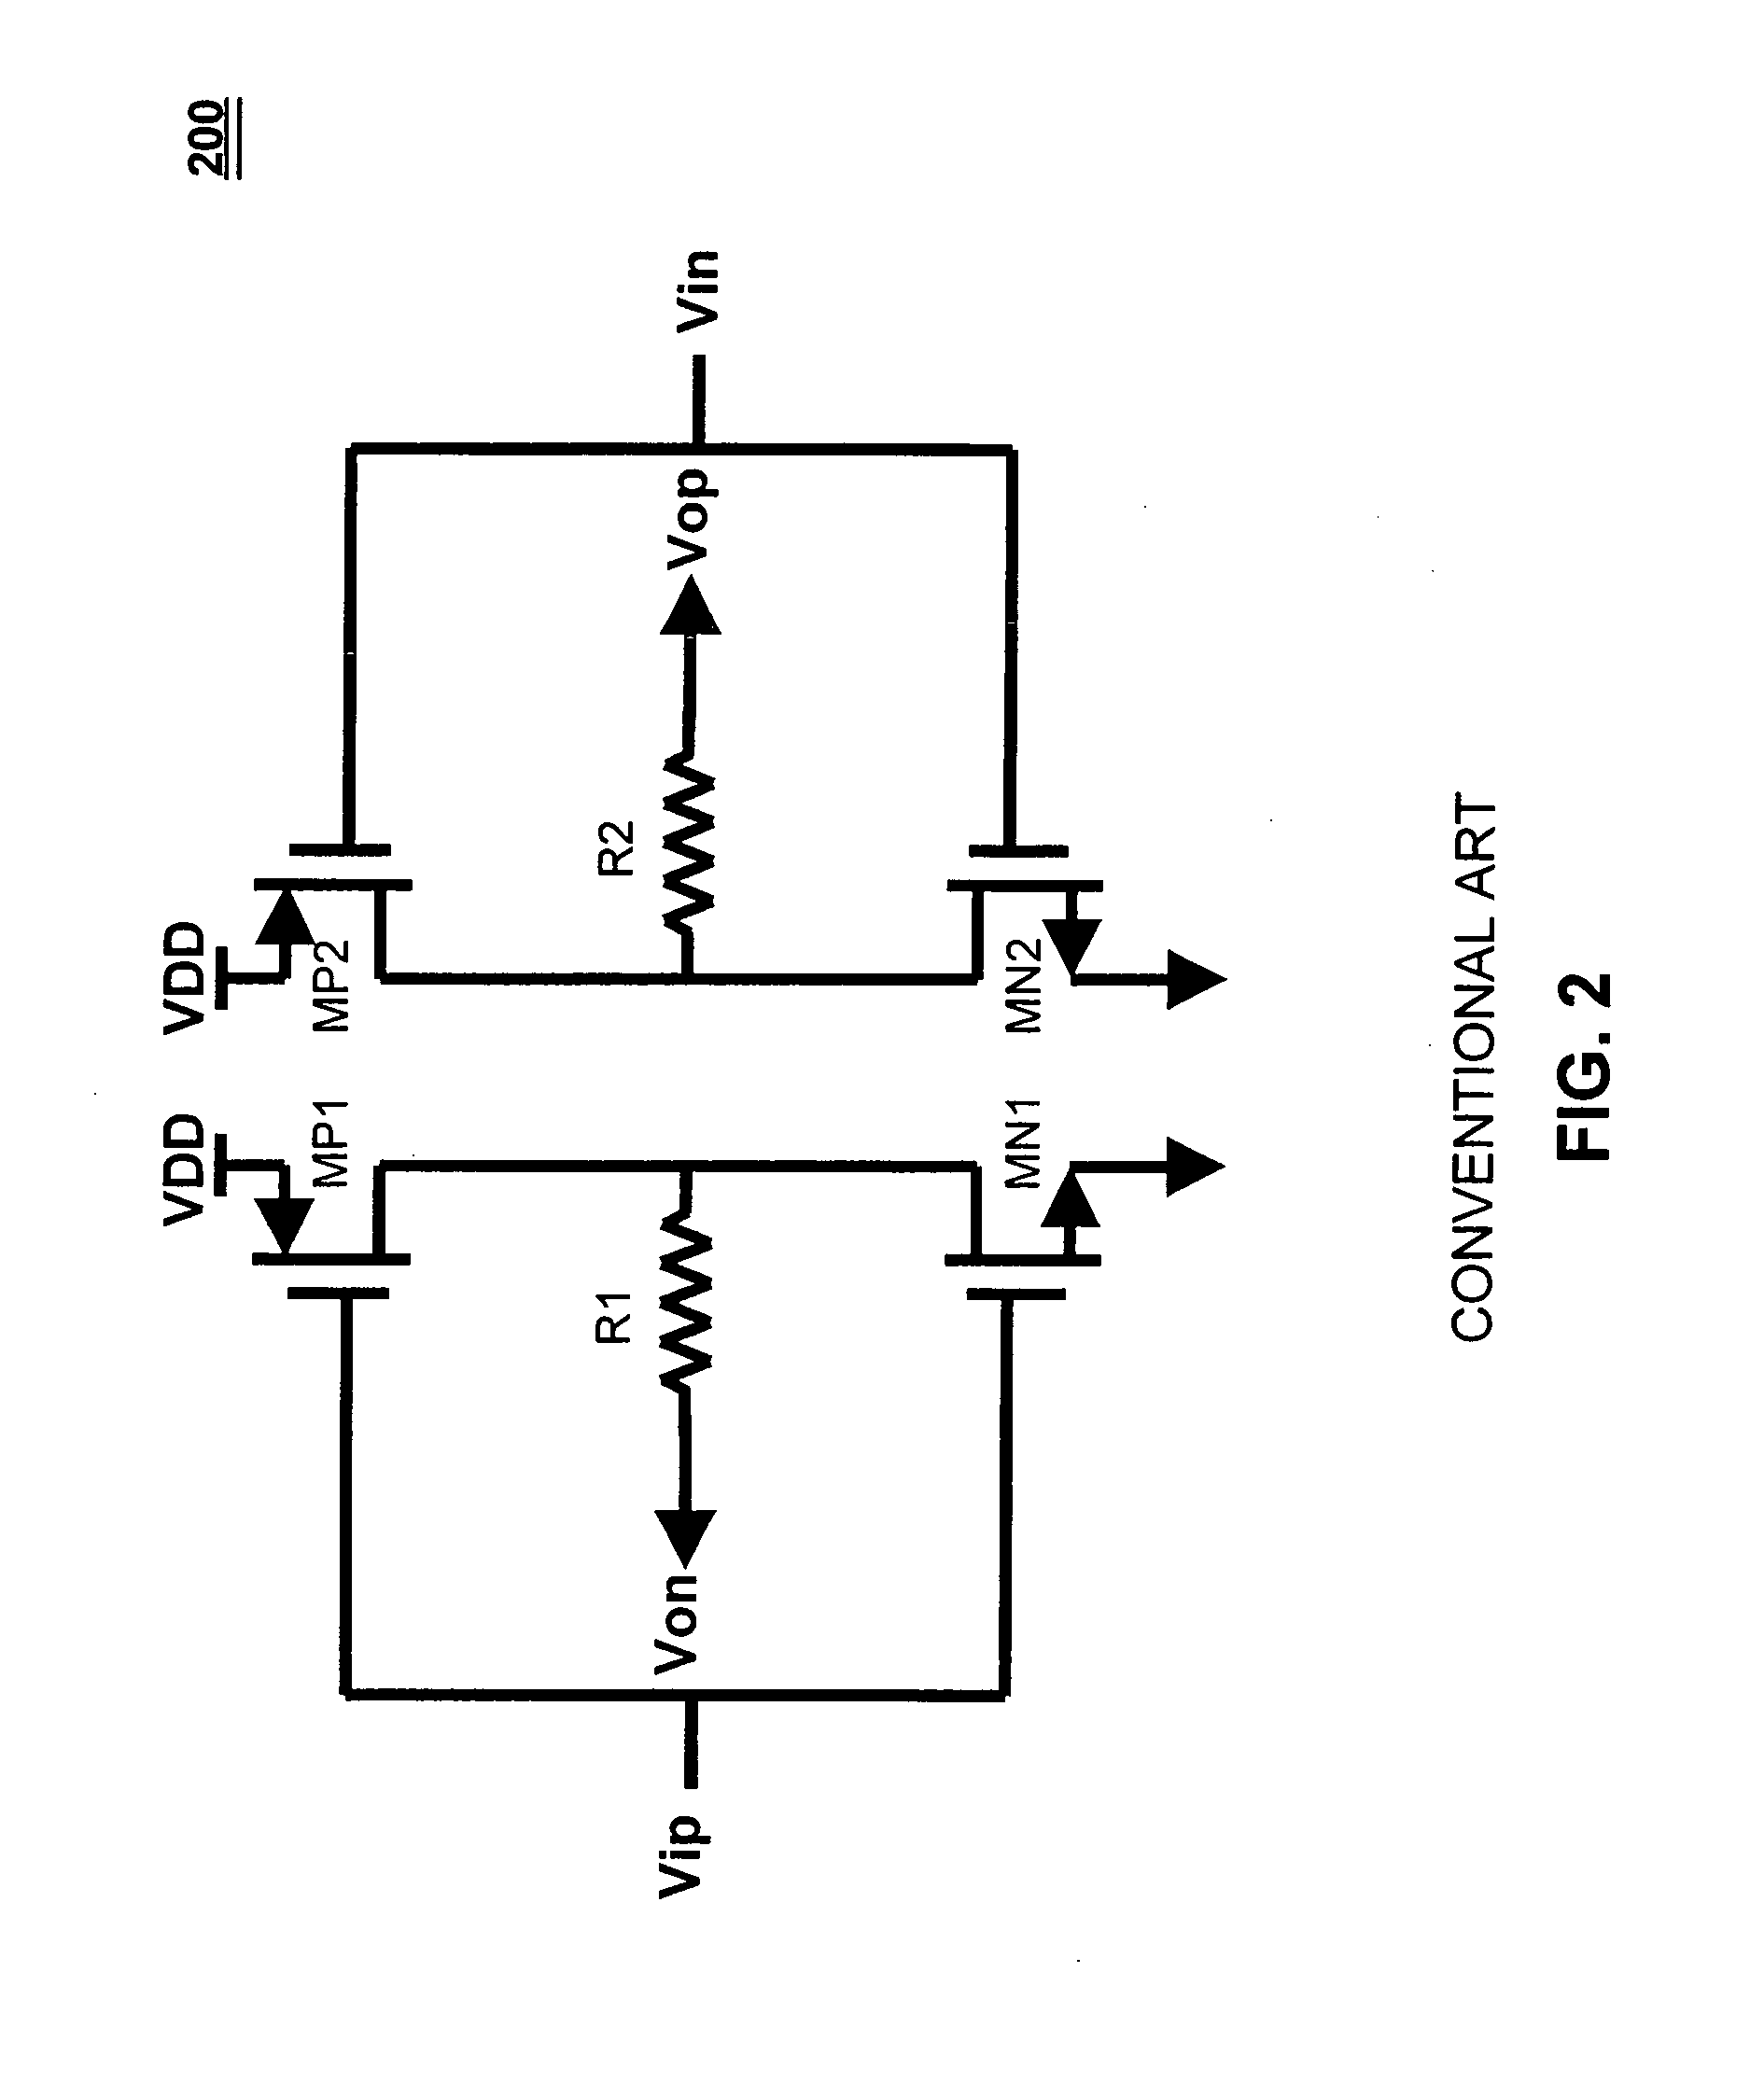 Series terminated CMOS output driver with impedance calibration